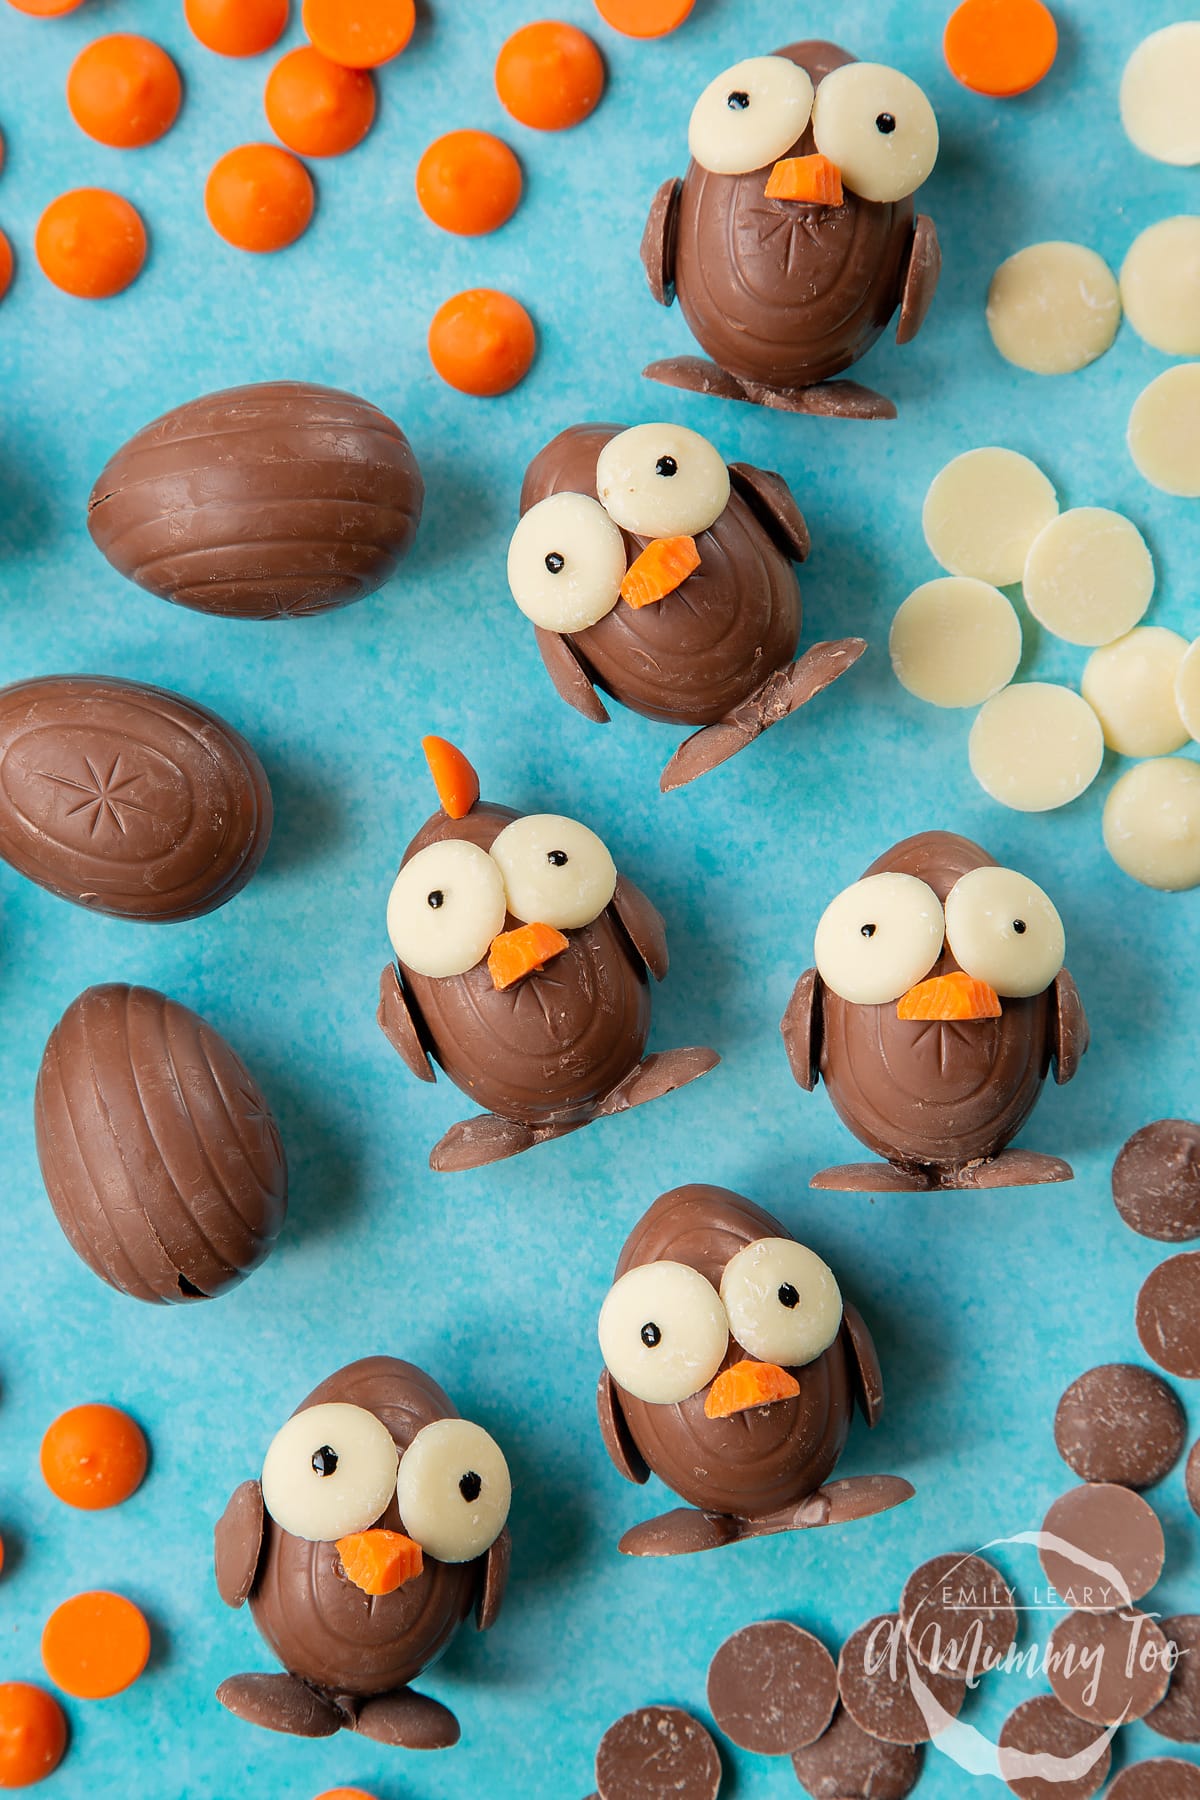 Five chocolate chicks made from creme eggs and chocolate buttons, laying on a blue background, surrounded by milk chocolate buttons, white chocolate buttons and chocolate orange buttons. 